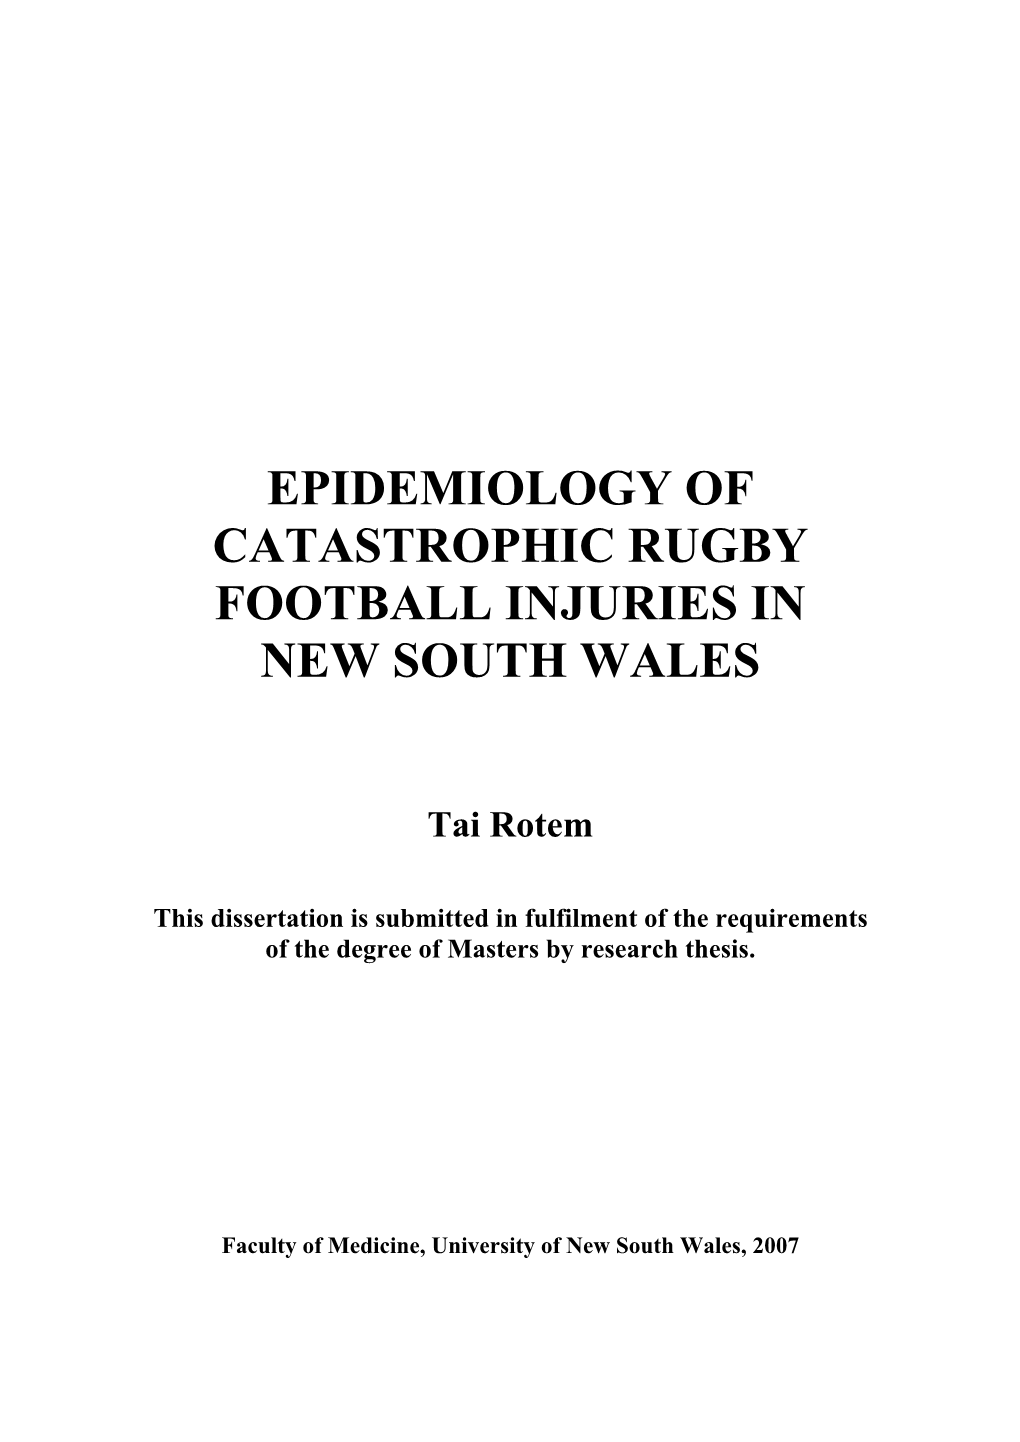 Epidemiology of Serious Sport and Recreational